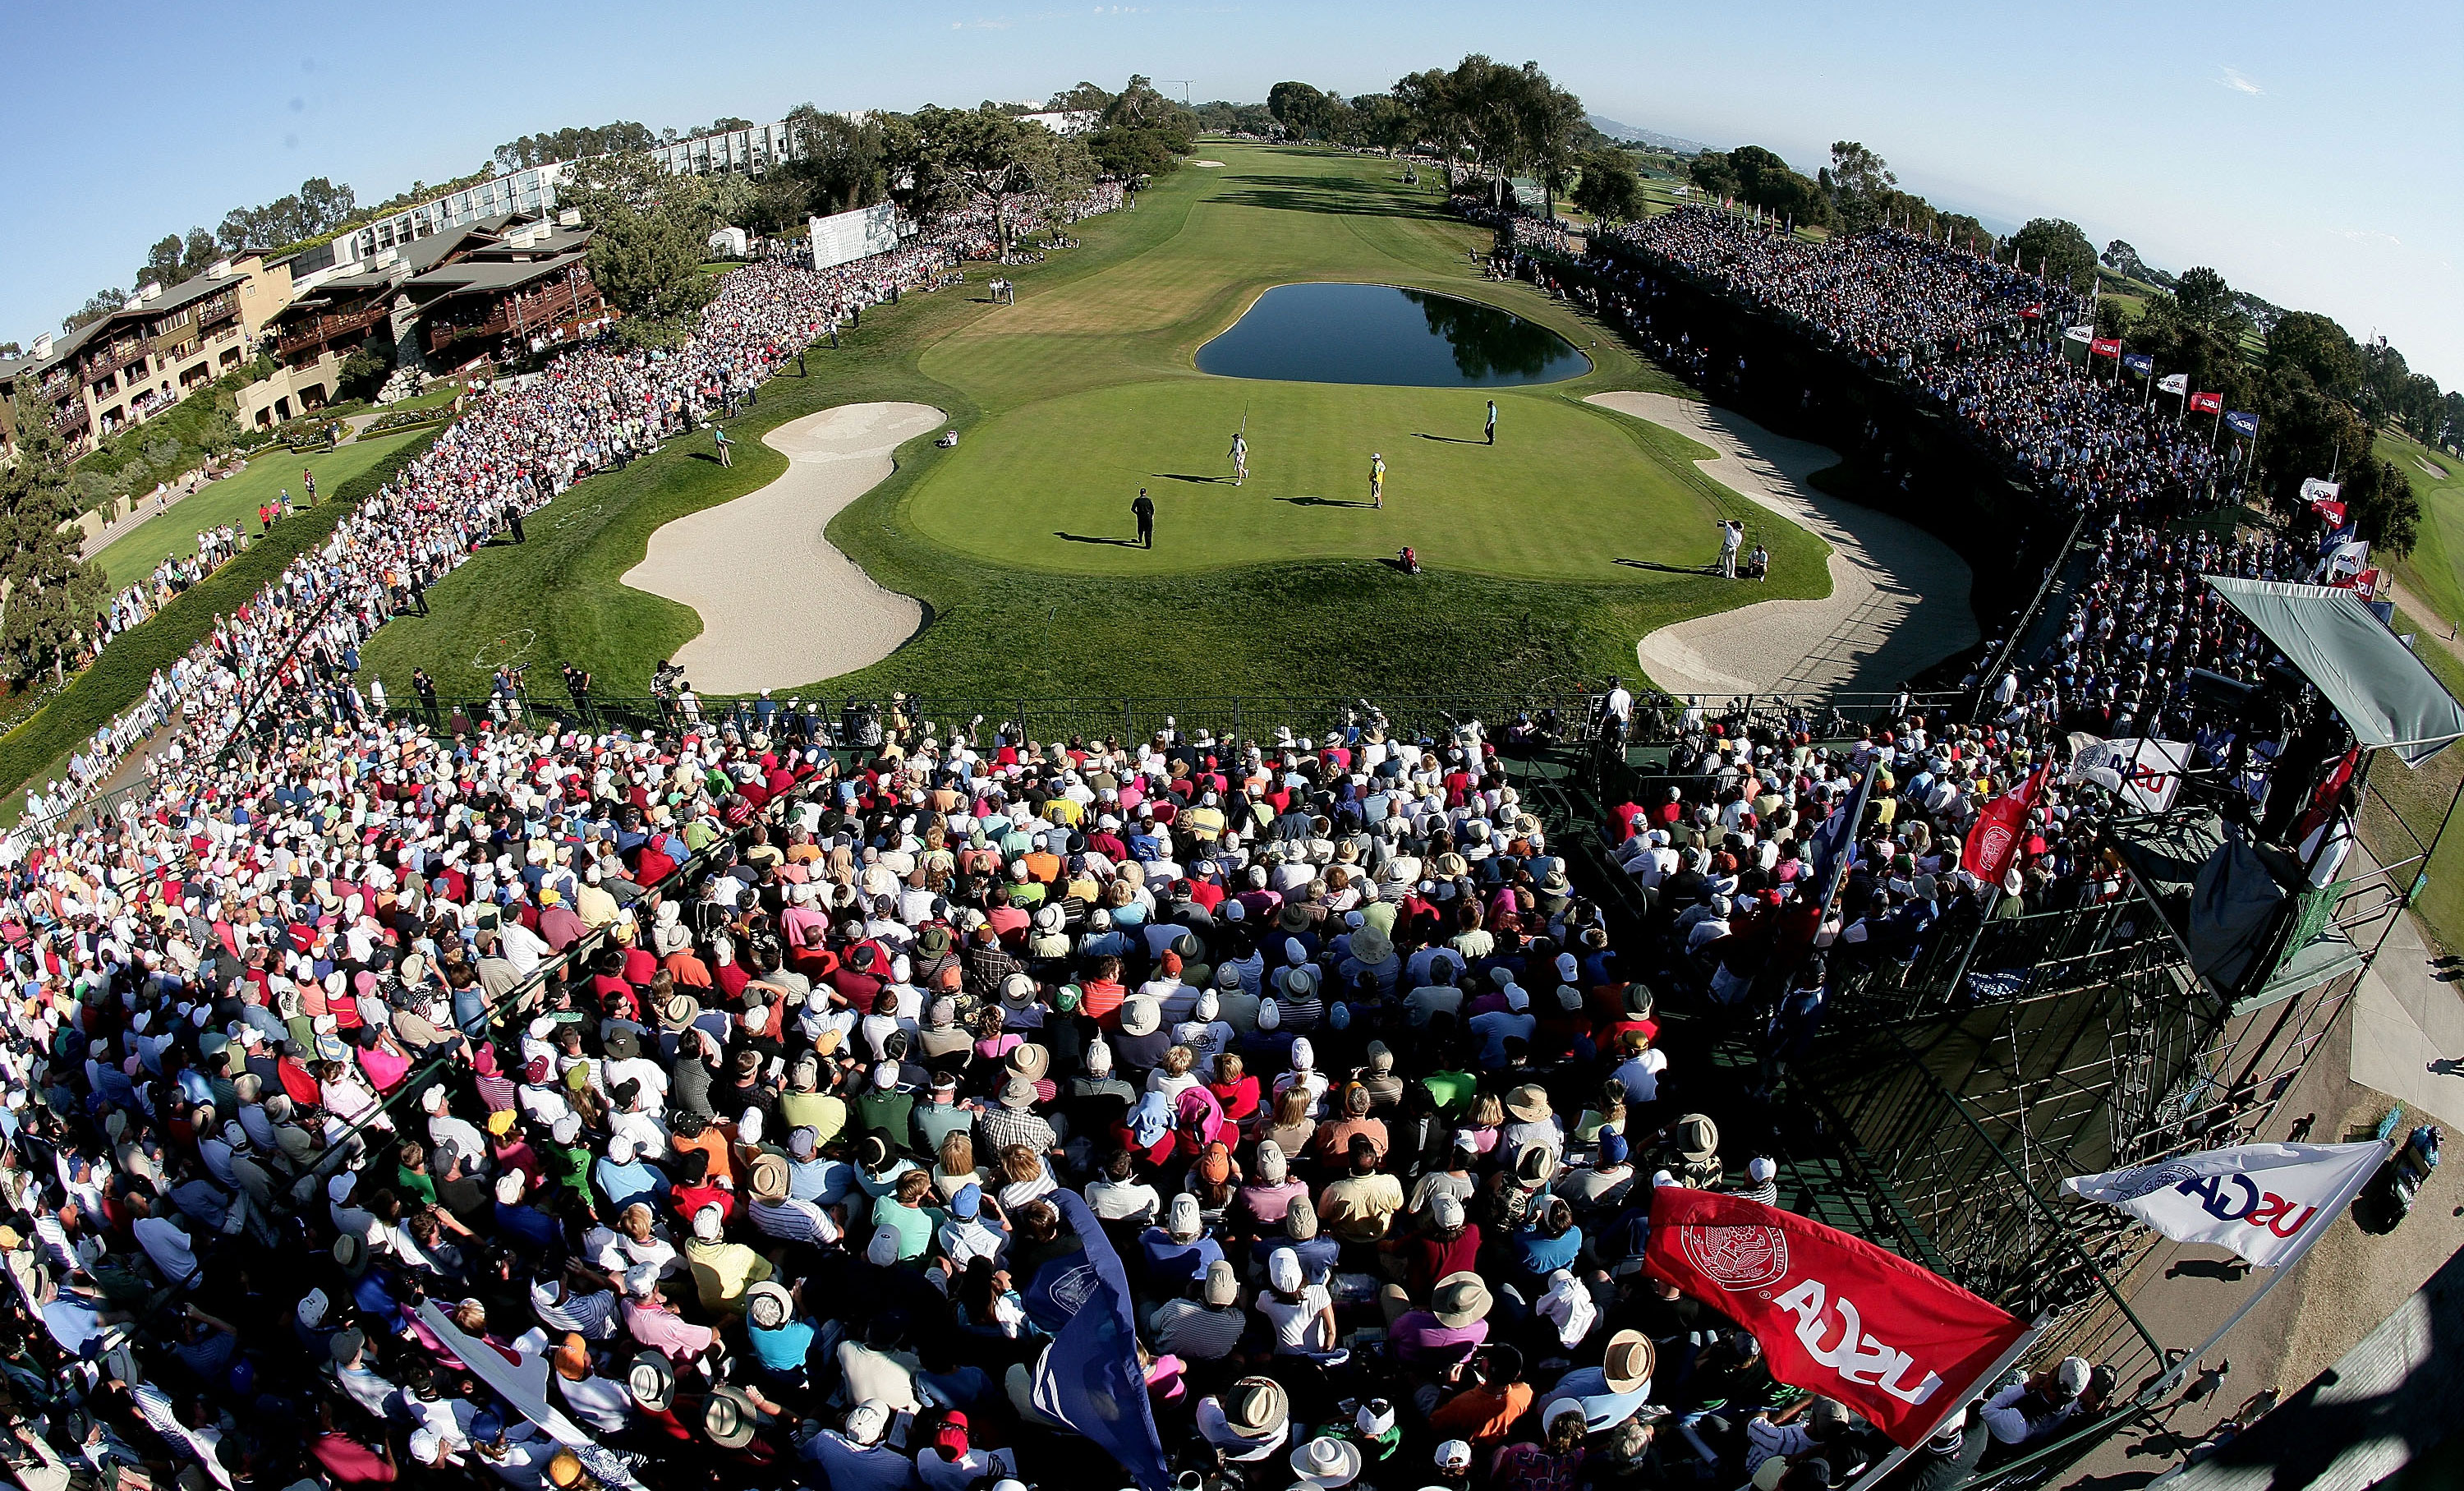 USGA taking stock at Torrey Pines during Farmers Insurance Open as 21 Adult Picture